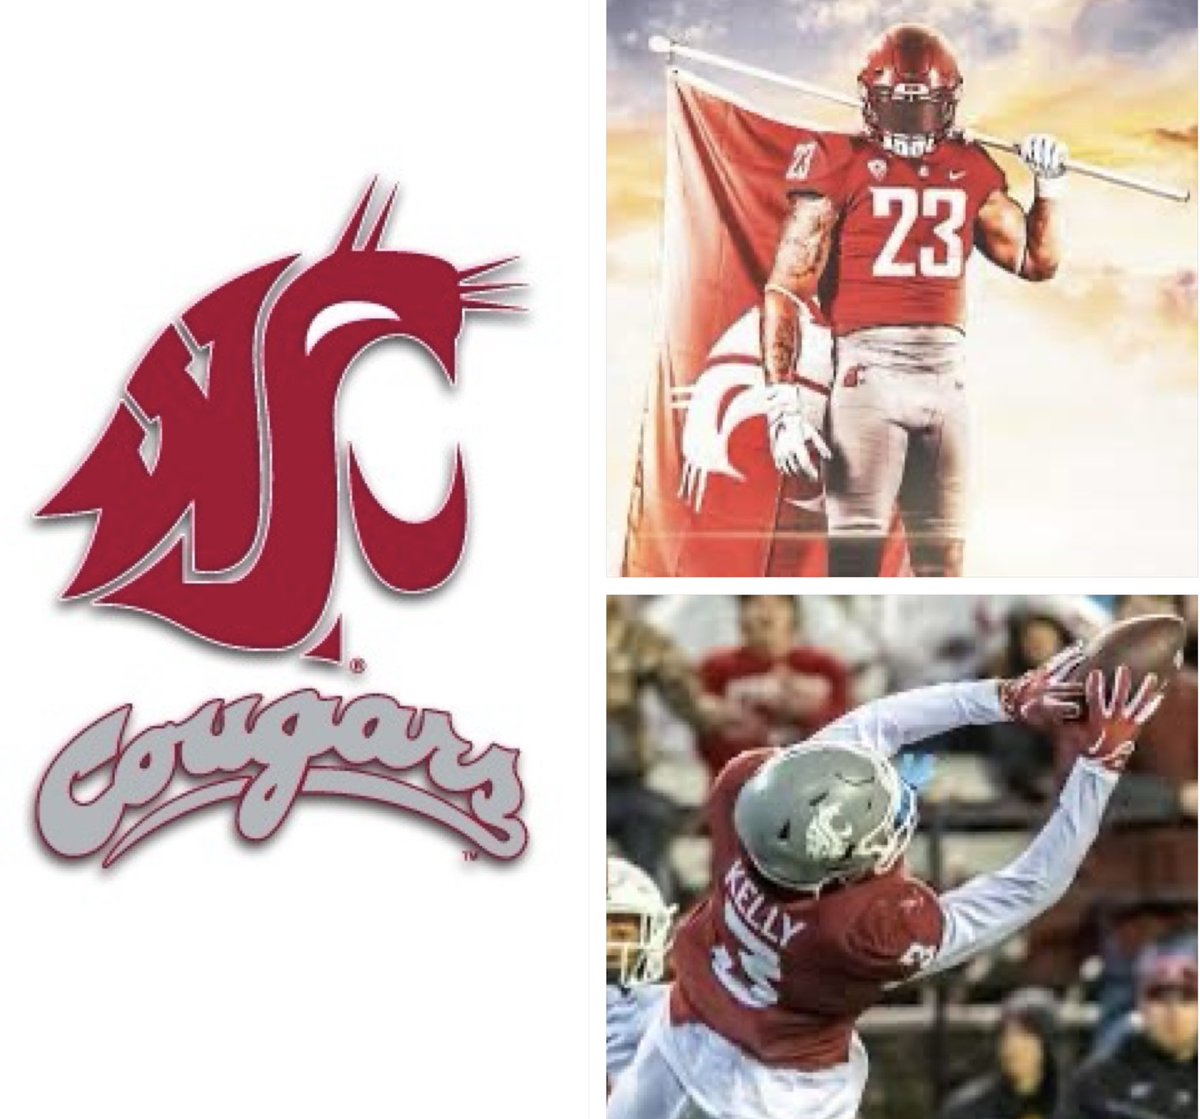 Grateful to God 🙏🏾 for the opportunity to be offered from @OCCoachEdwards @CoachDickert @WSUCougarFB @GusMcNair009 @VernonFox3 @702HSFB @CoachMikeHillSF @QBCatalano @bangulo @adamgorney @GregBiggins @BrandonHuffman @LemmingReport @ChadSimmons_ @DemetricDWarren @Cen10Football